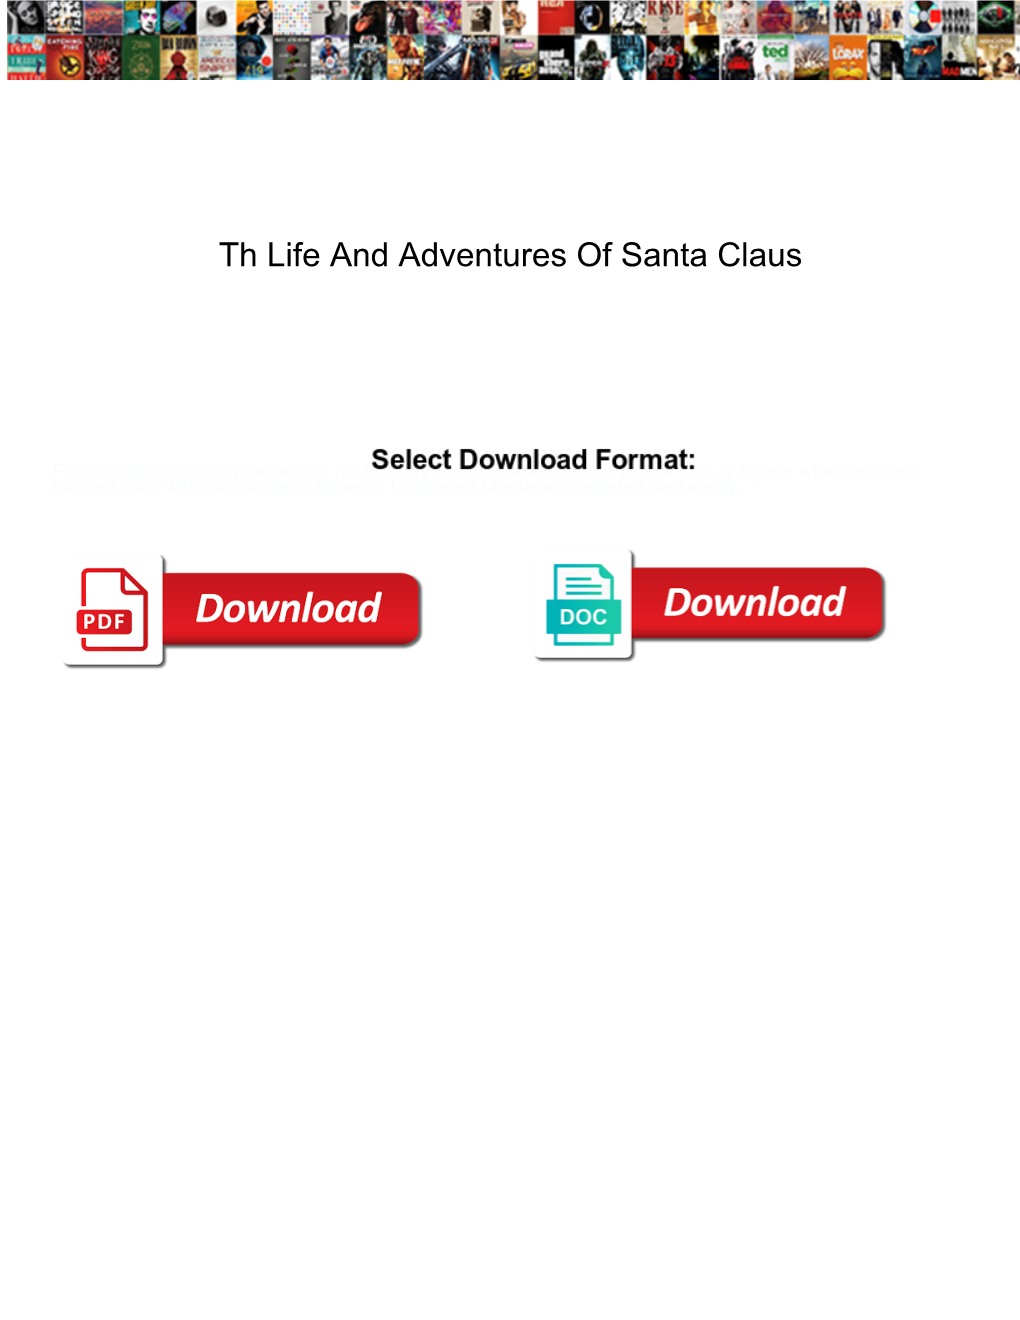 Th Life and Adventures of Santa Claus